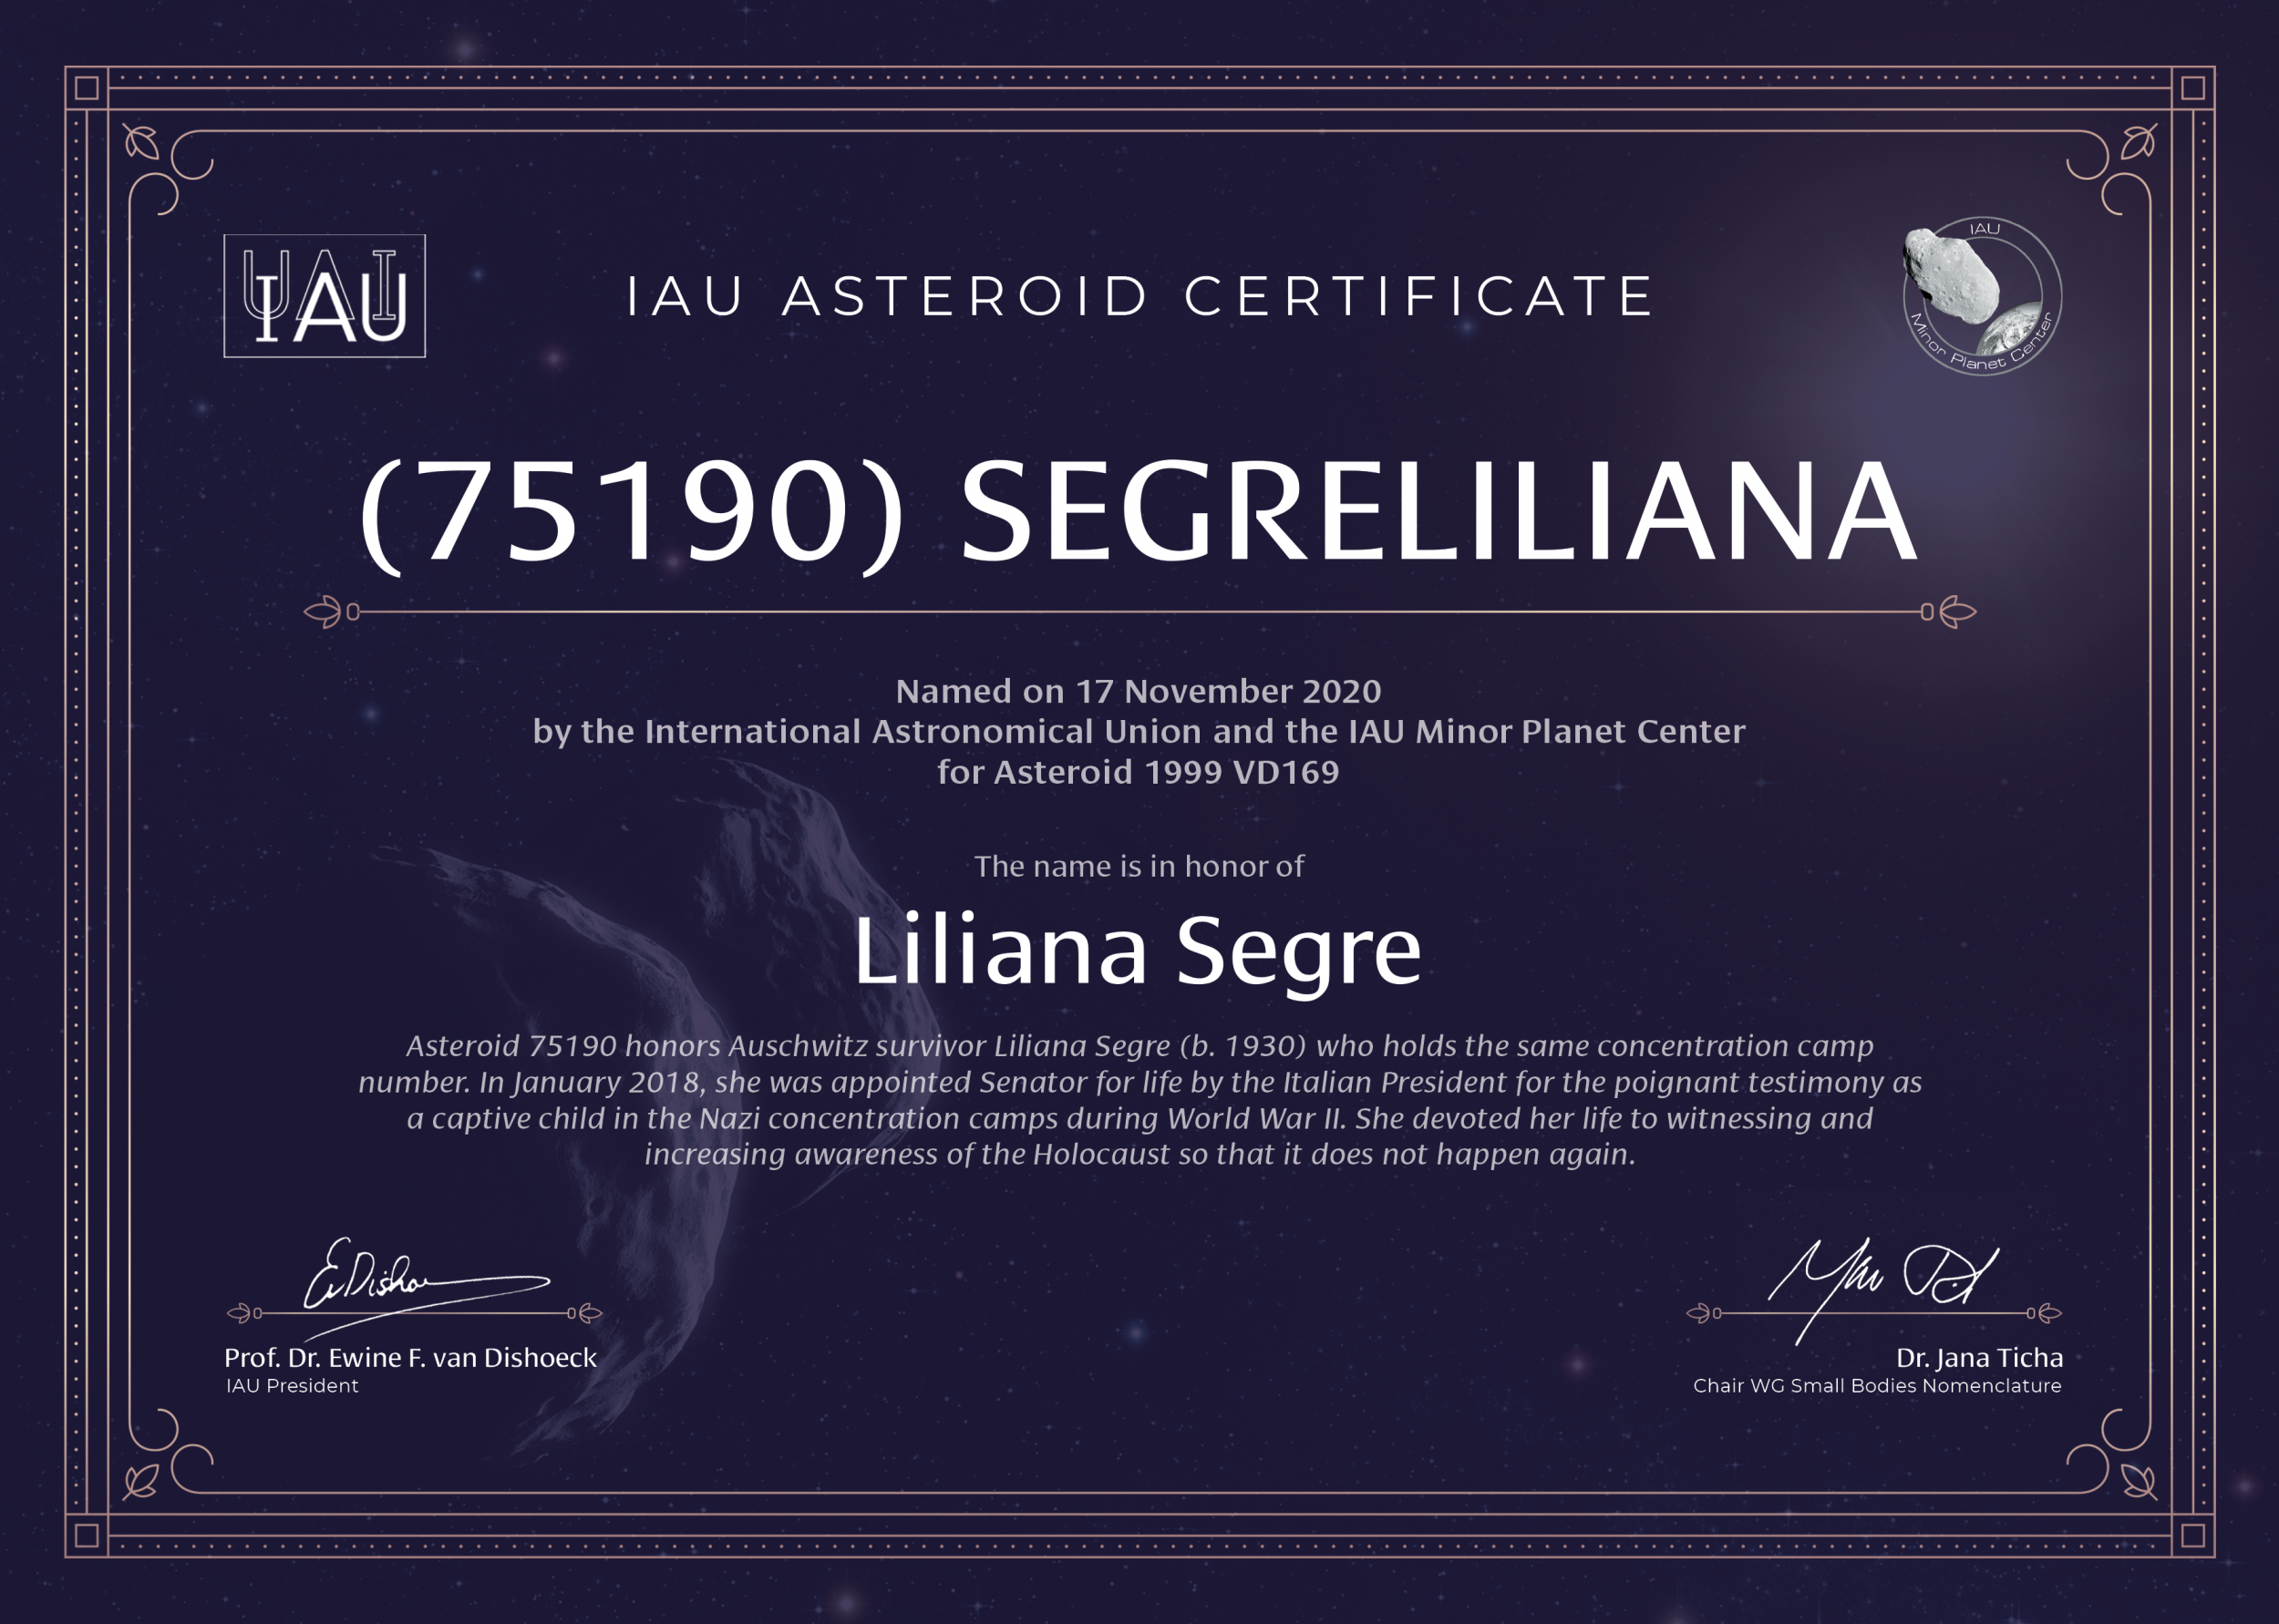 This photo is of the certificate presented to Liliana Segre to announce the naming of an asteroid in her honor.